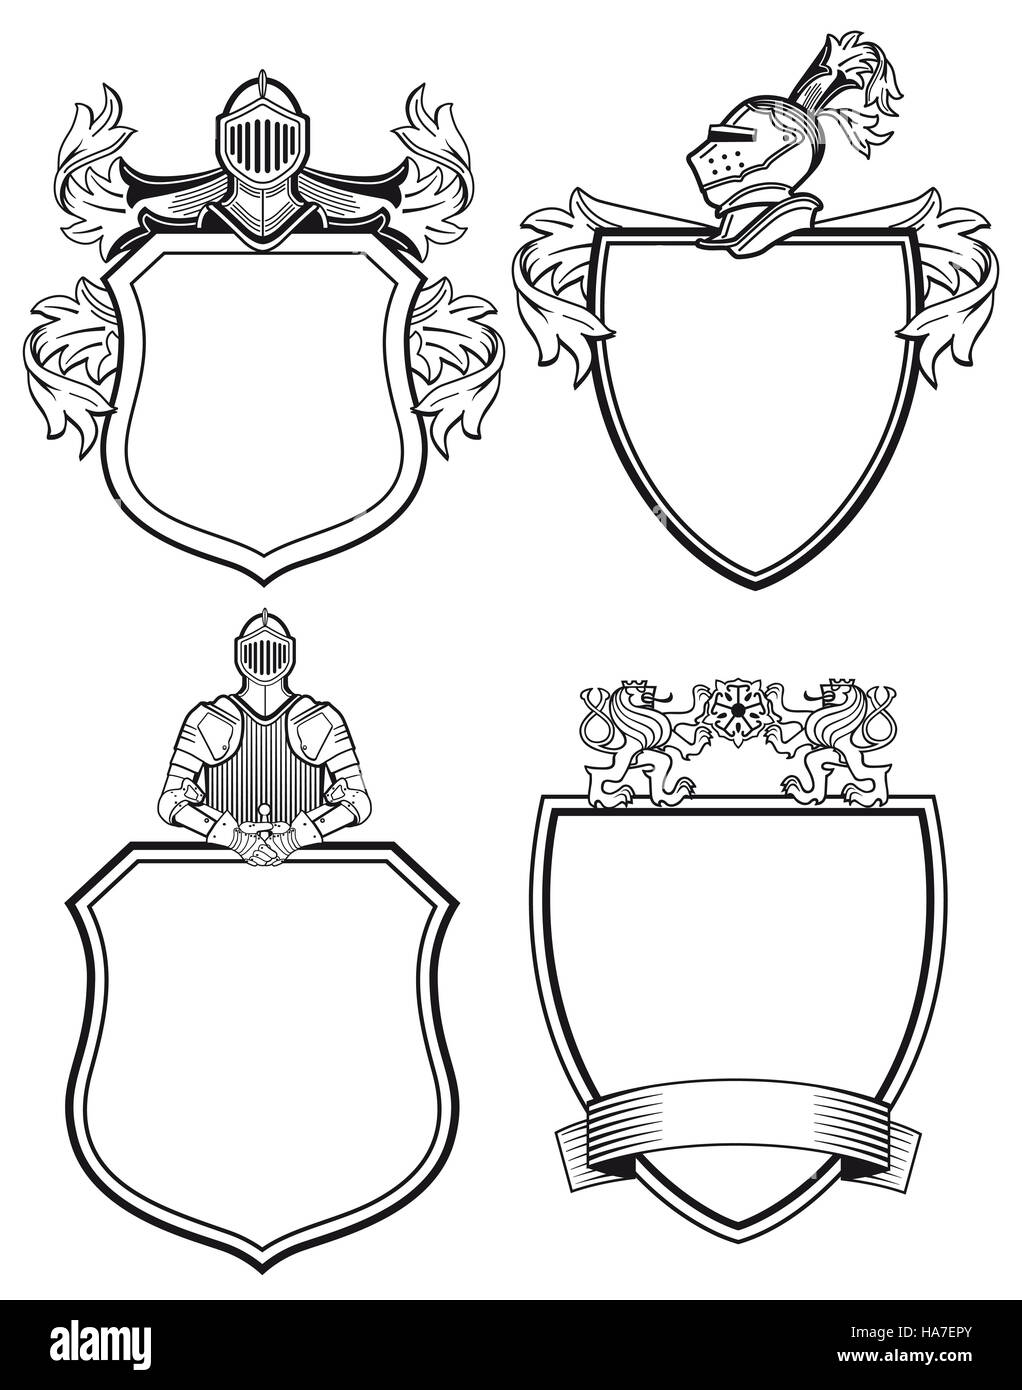 Knight shields and crests Stock Photo